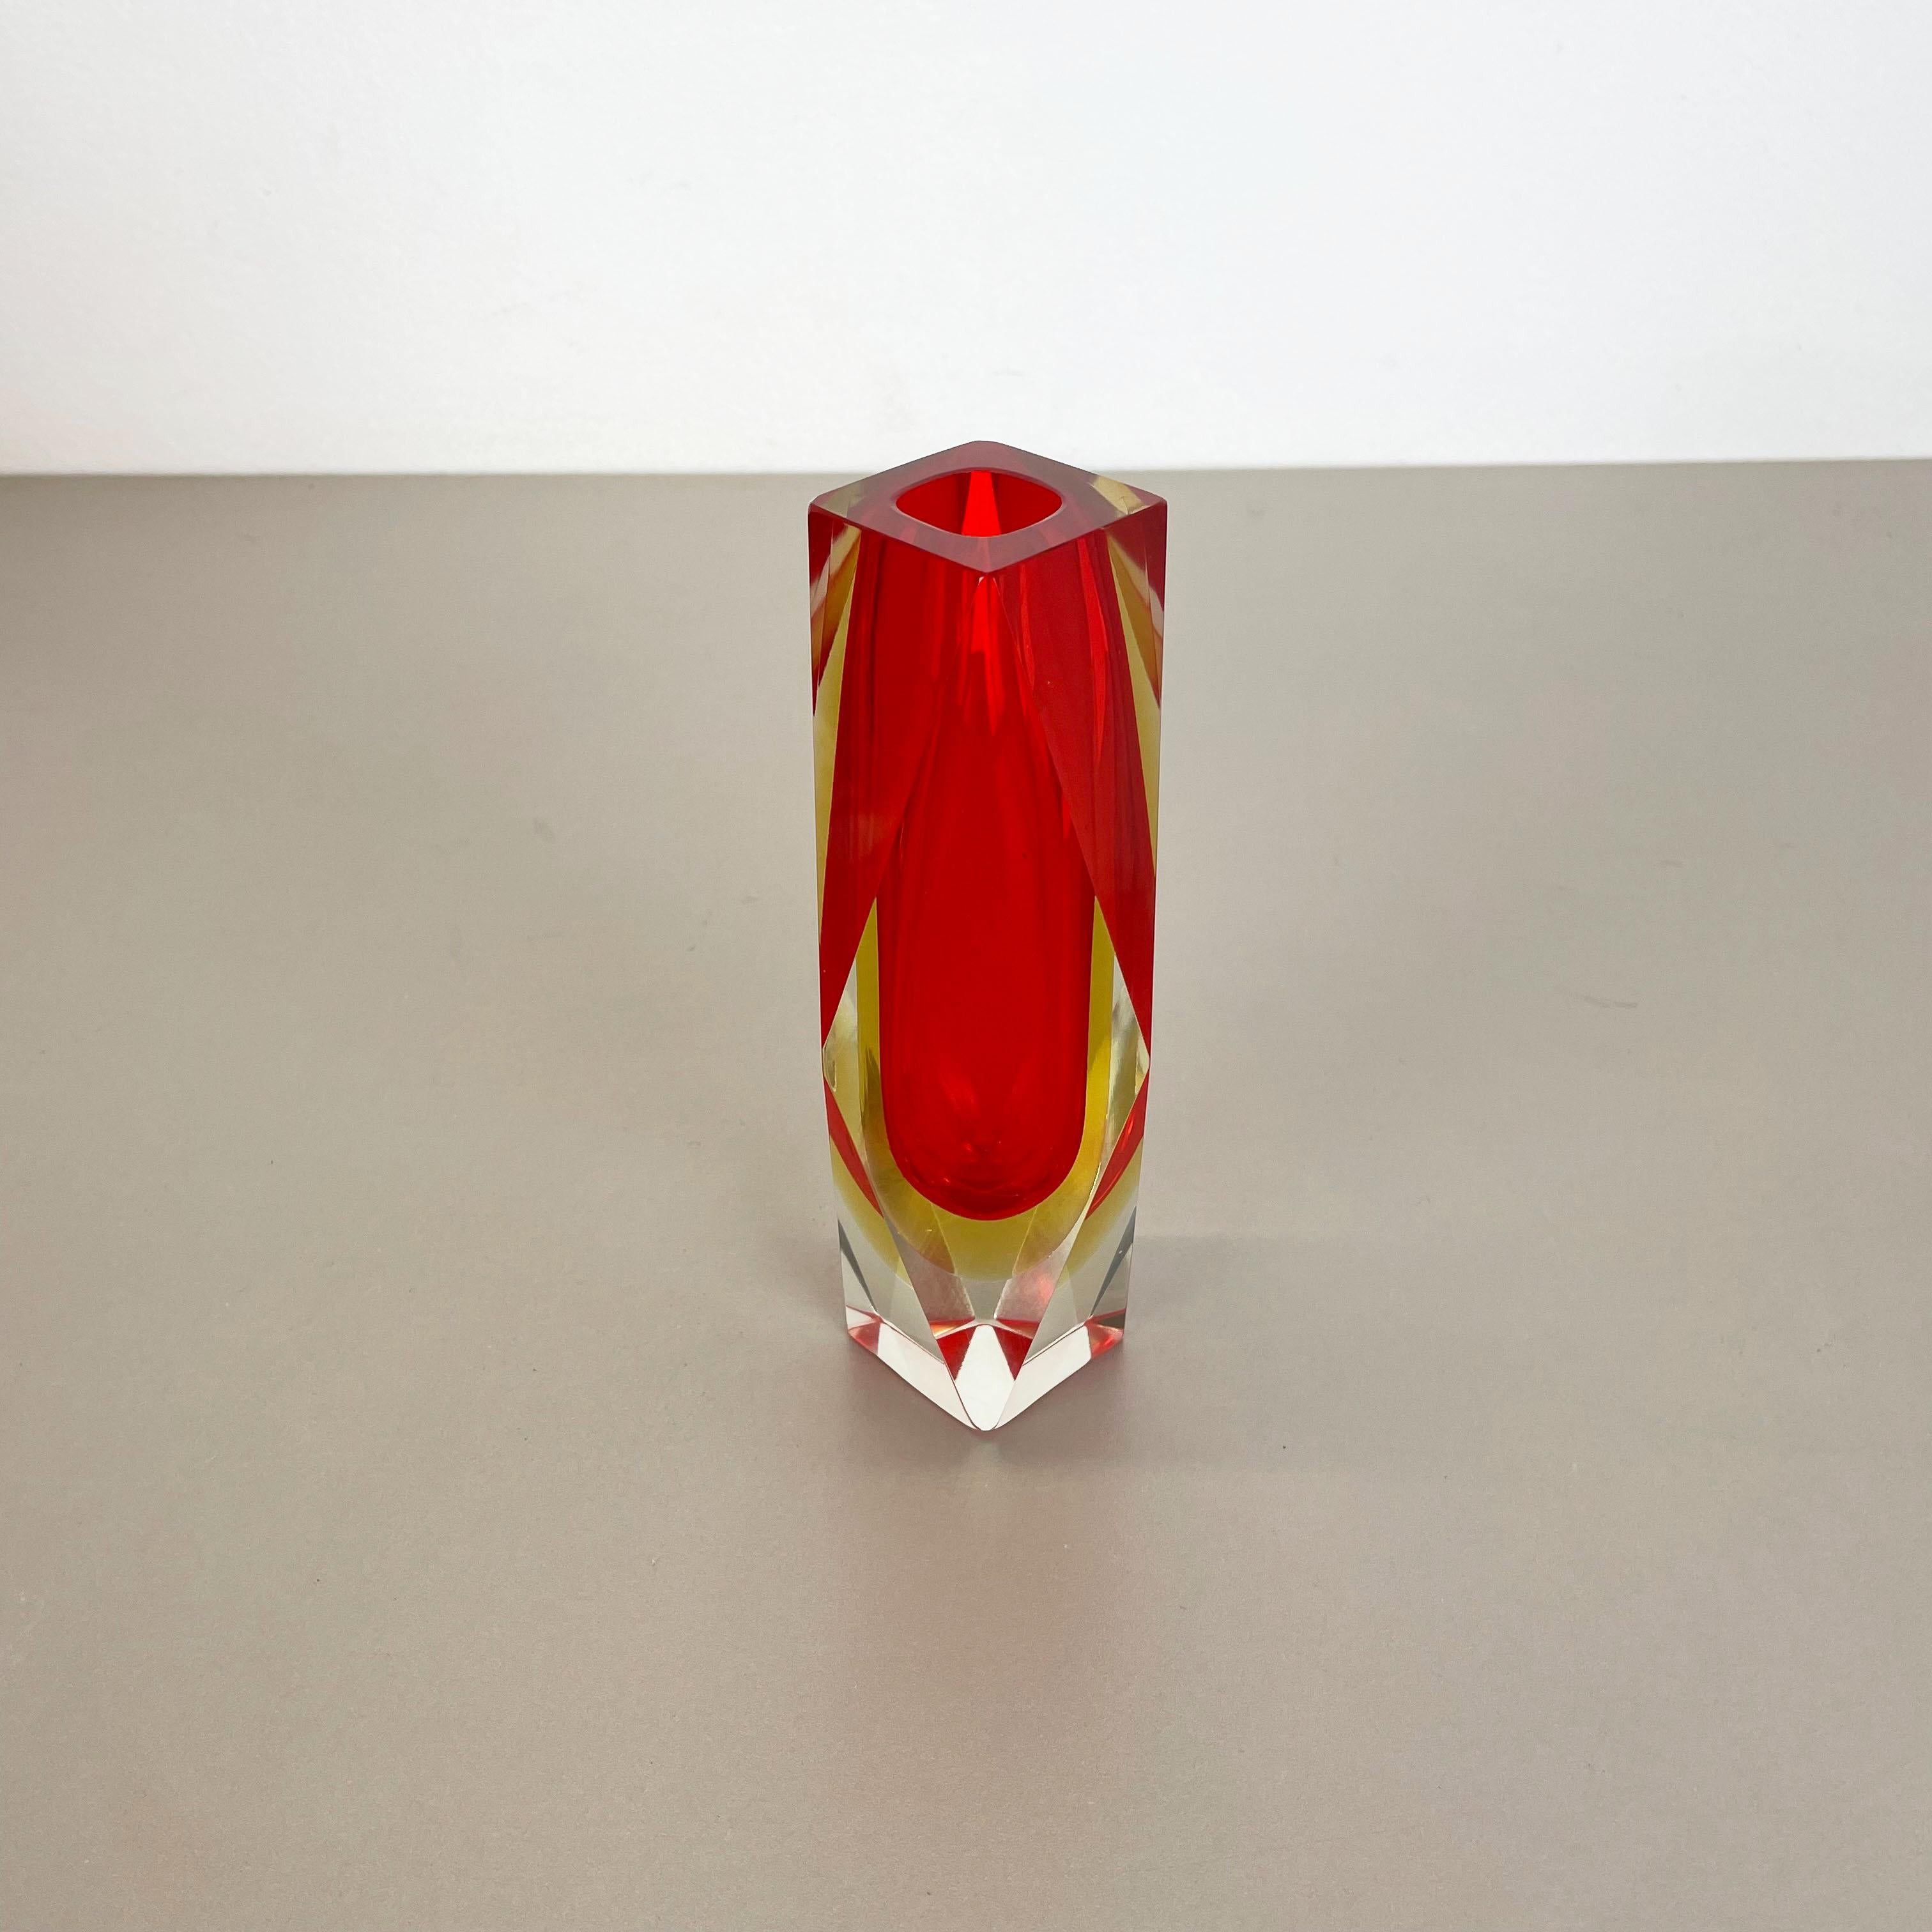 Mid-Century Modern Large Red Murano Glass Sommerso Vase by Flavio Poli Attributed, Italy 1970s For Sale